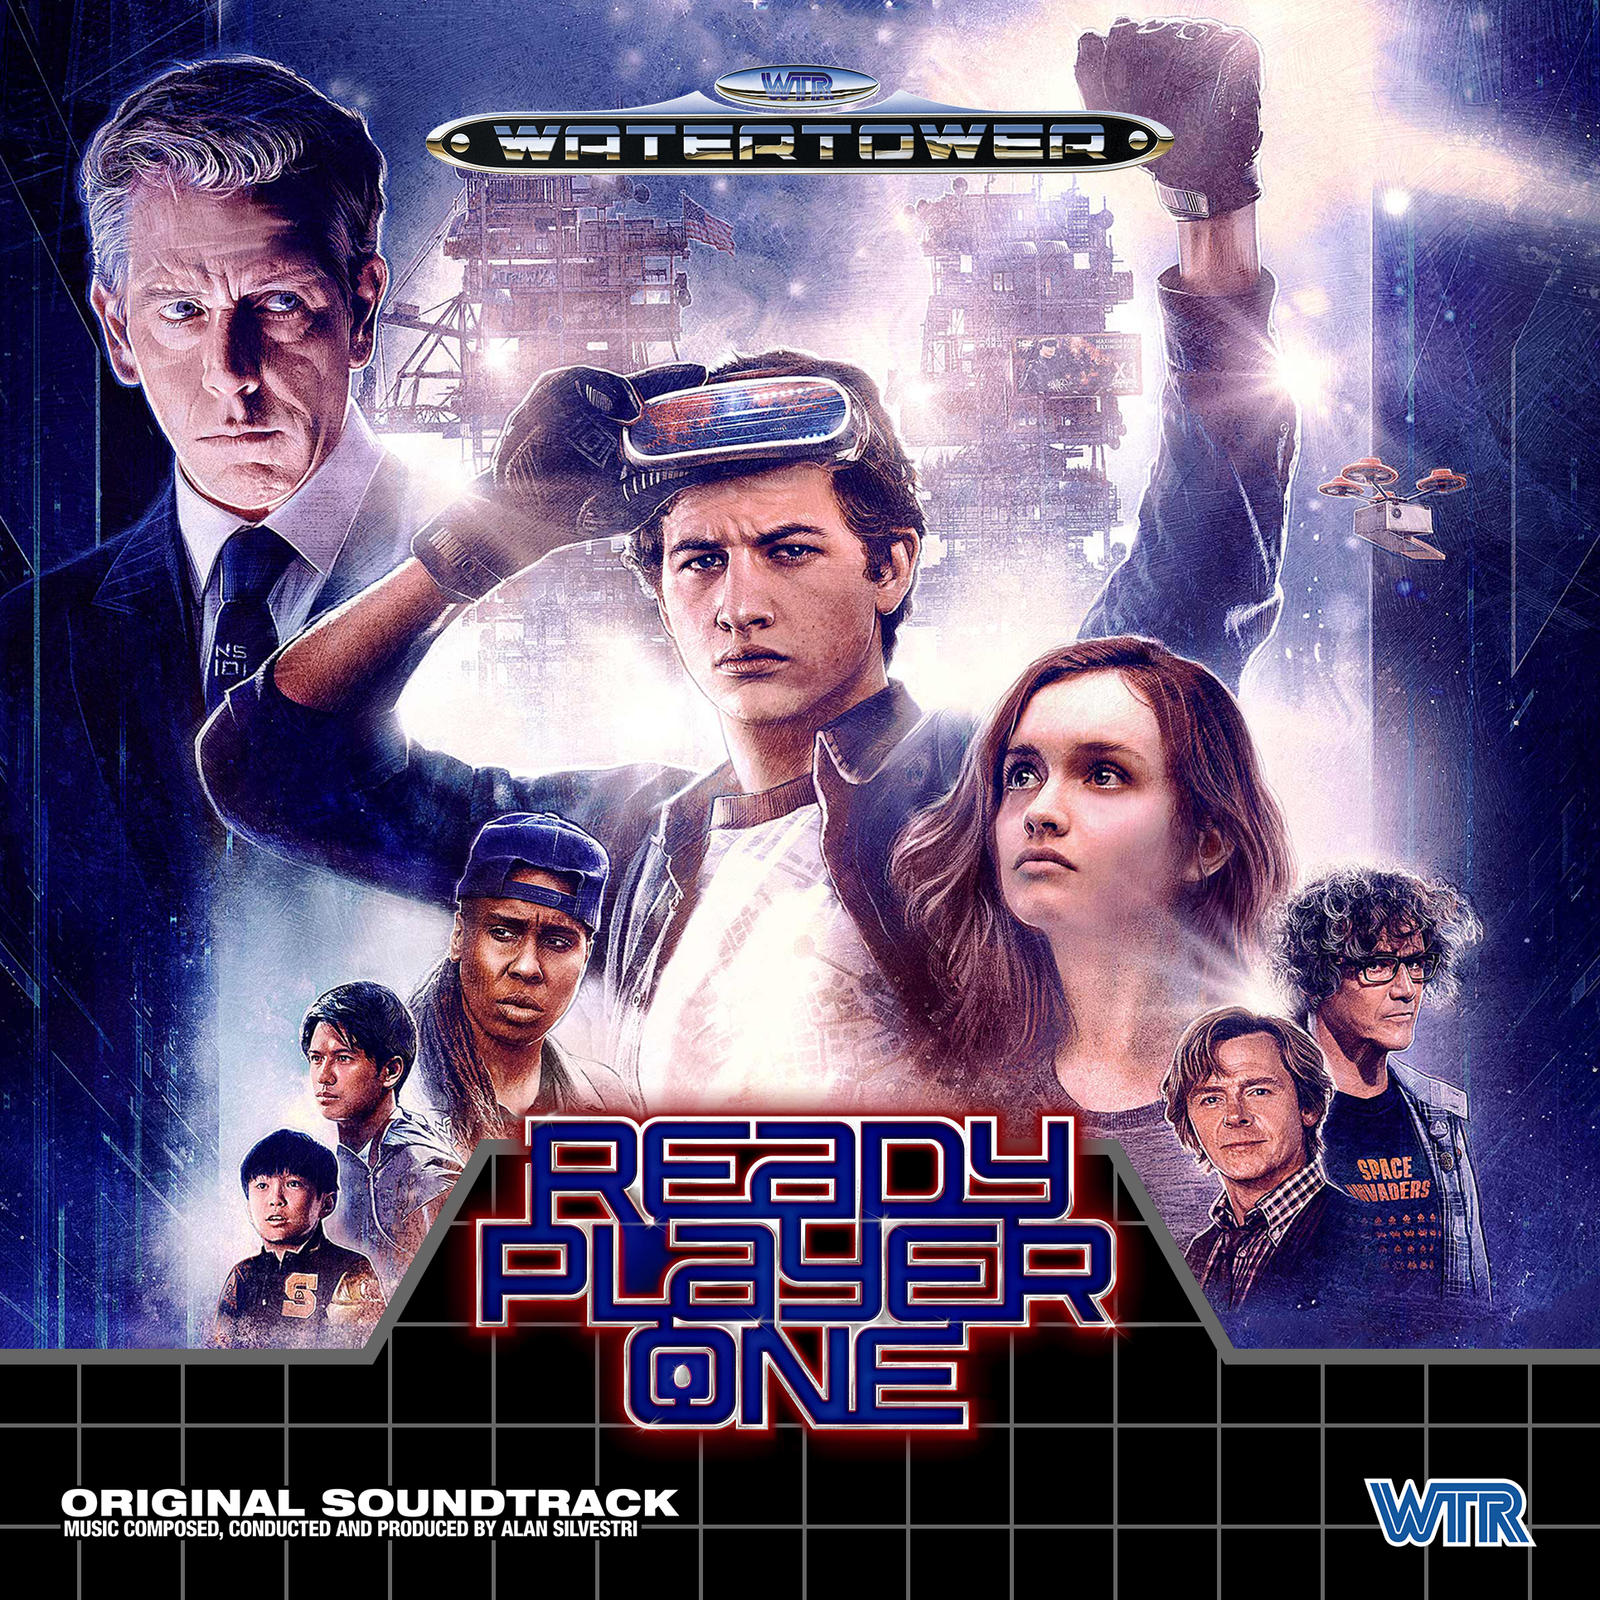 Ready Player One soundtrack and songs list